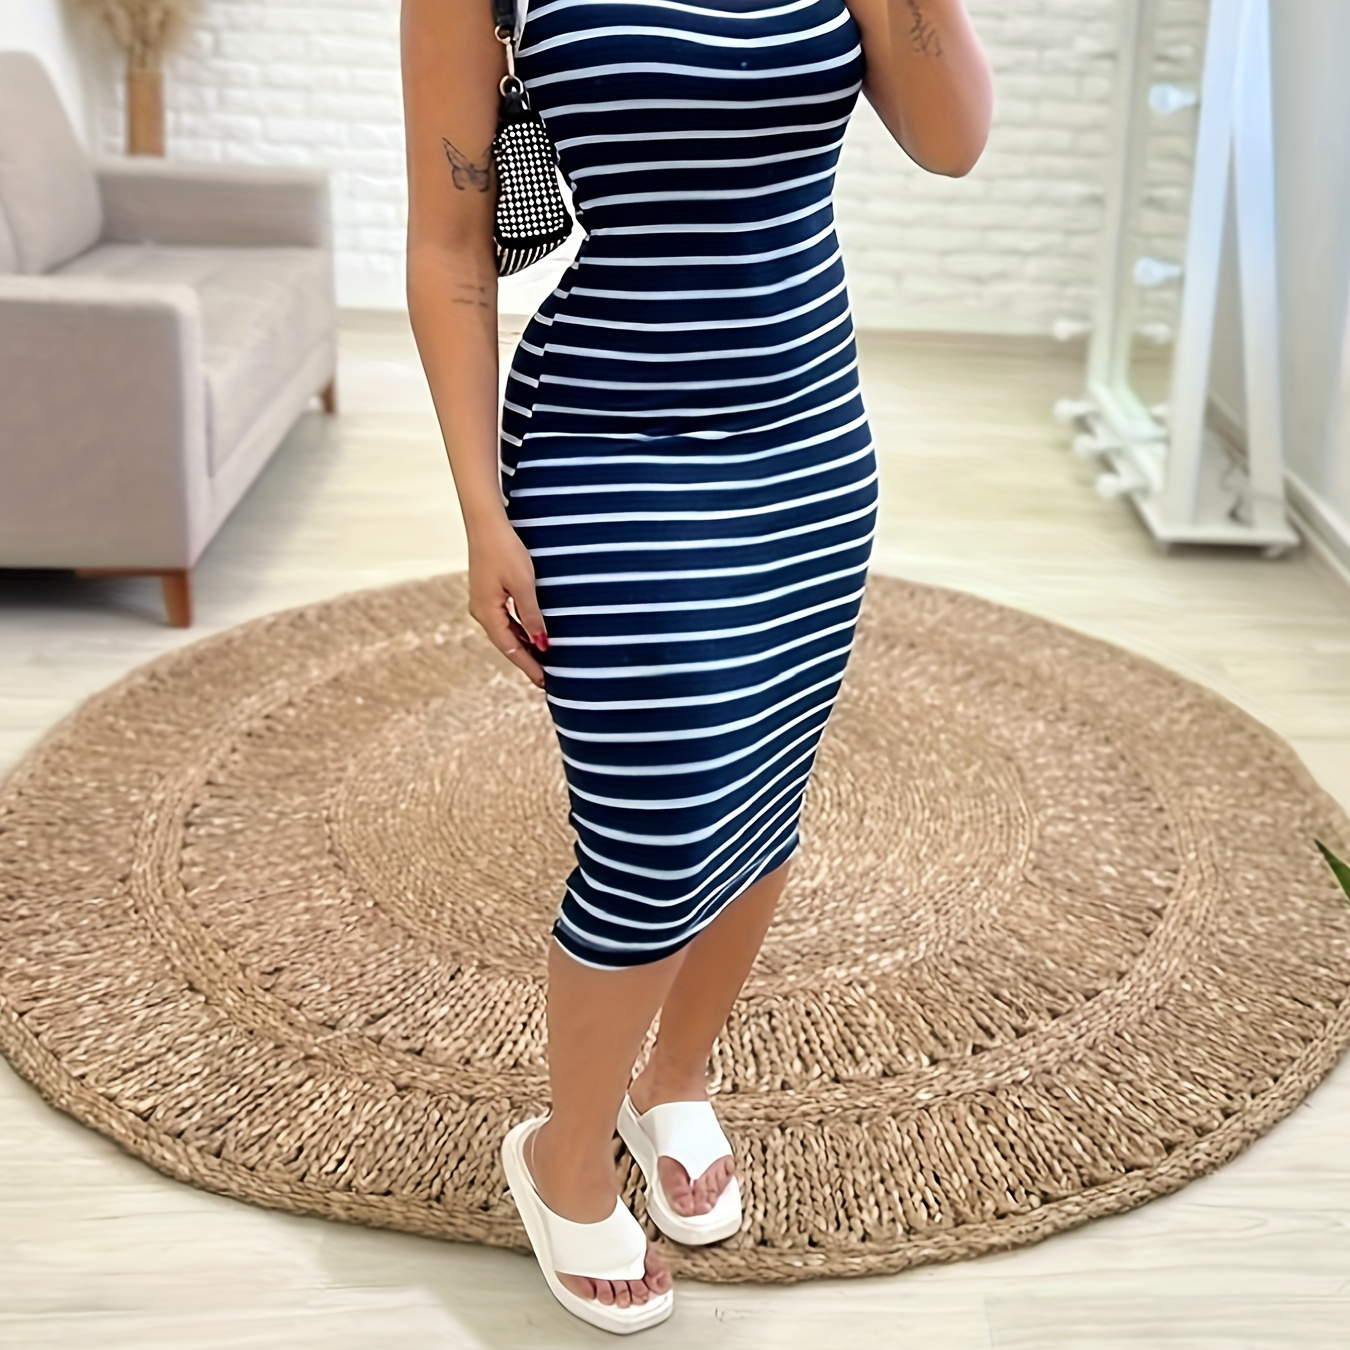 

Striped Scoop Neck Dress, Sexy Sleeveless Sheath Dress For Spring & Summer, Women's Clothing